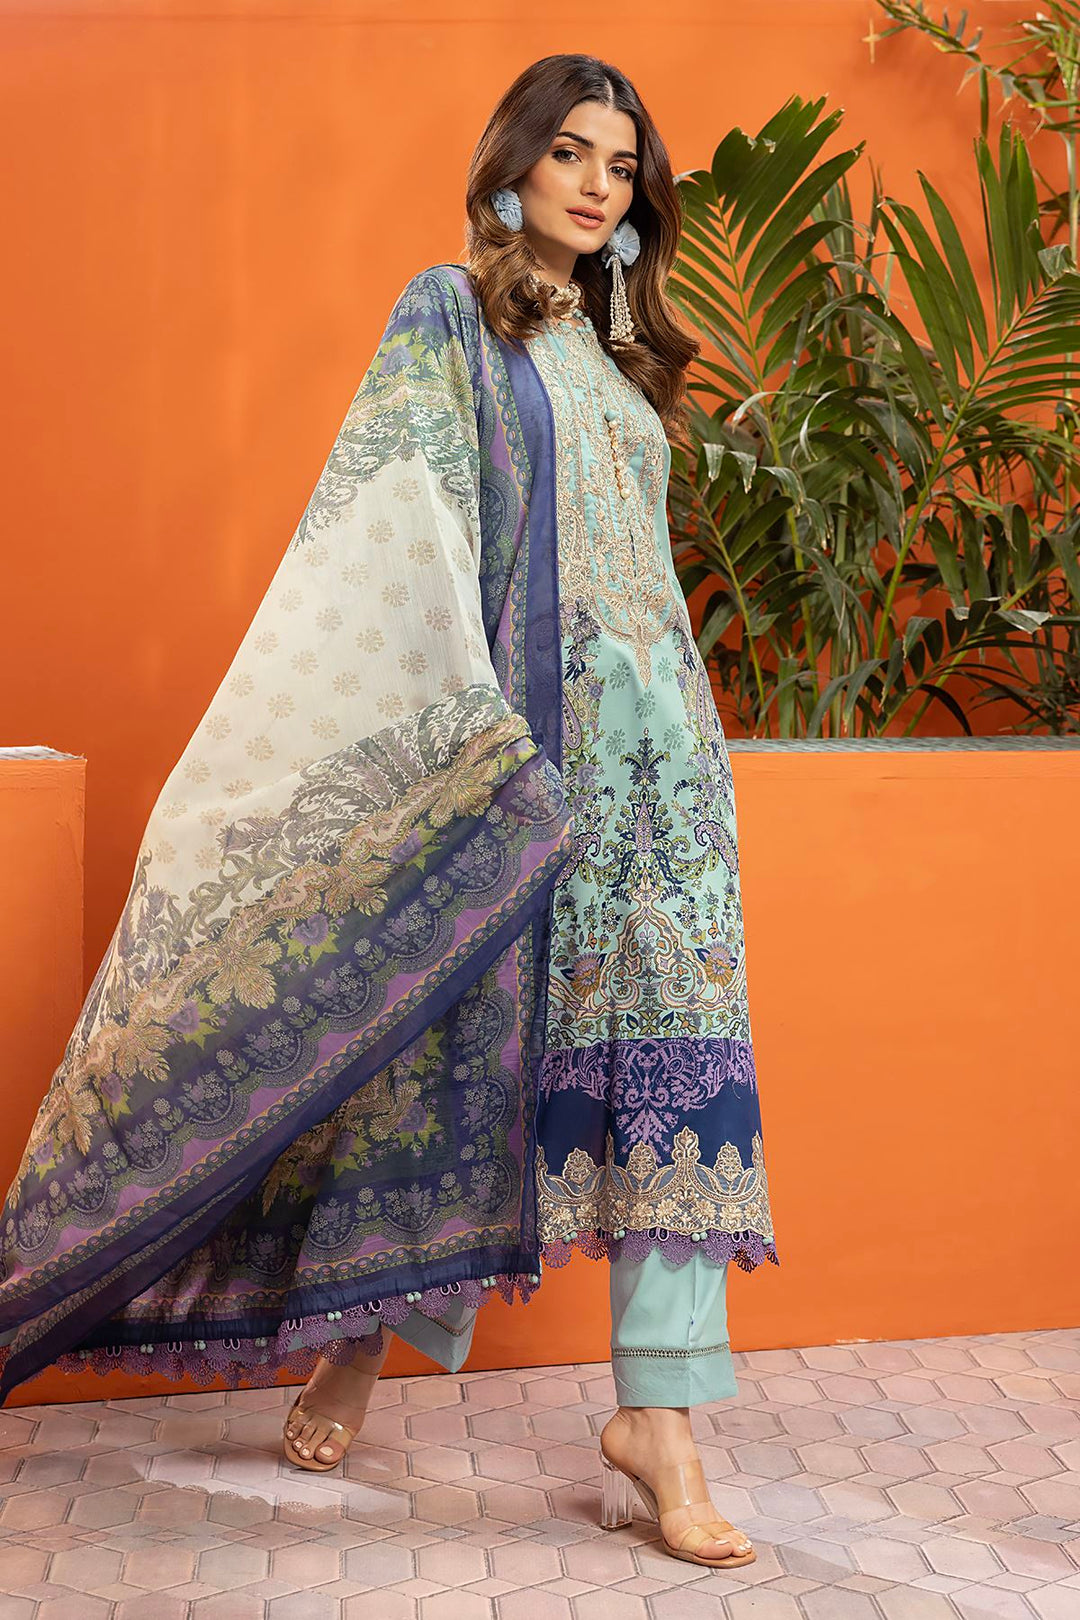 pakistani outfits usa a woman in a blue and white outfit